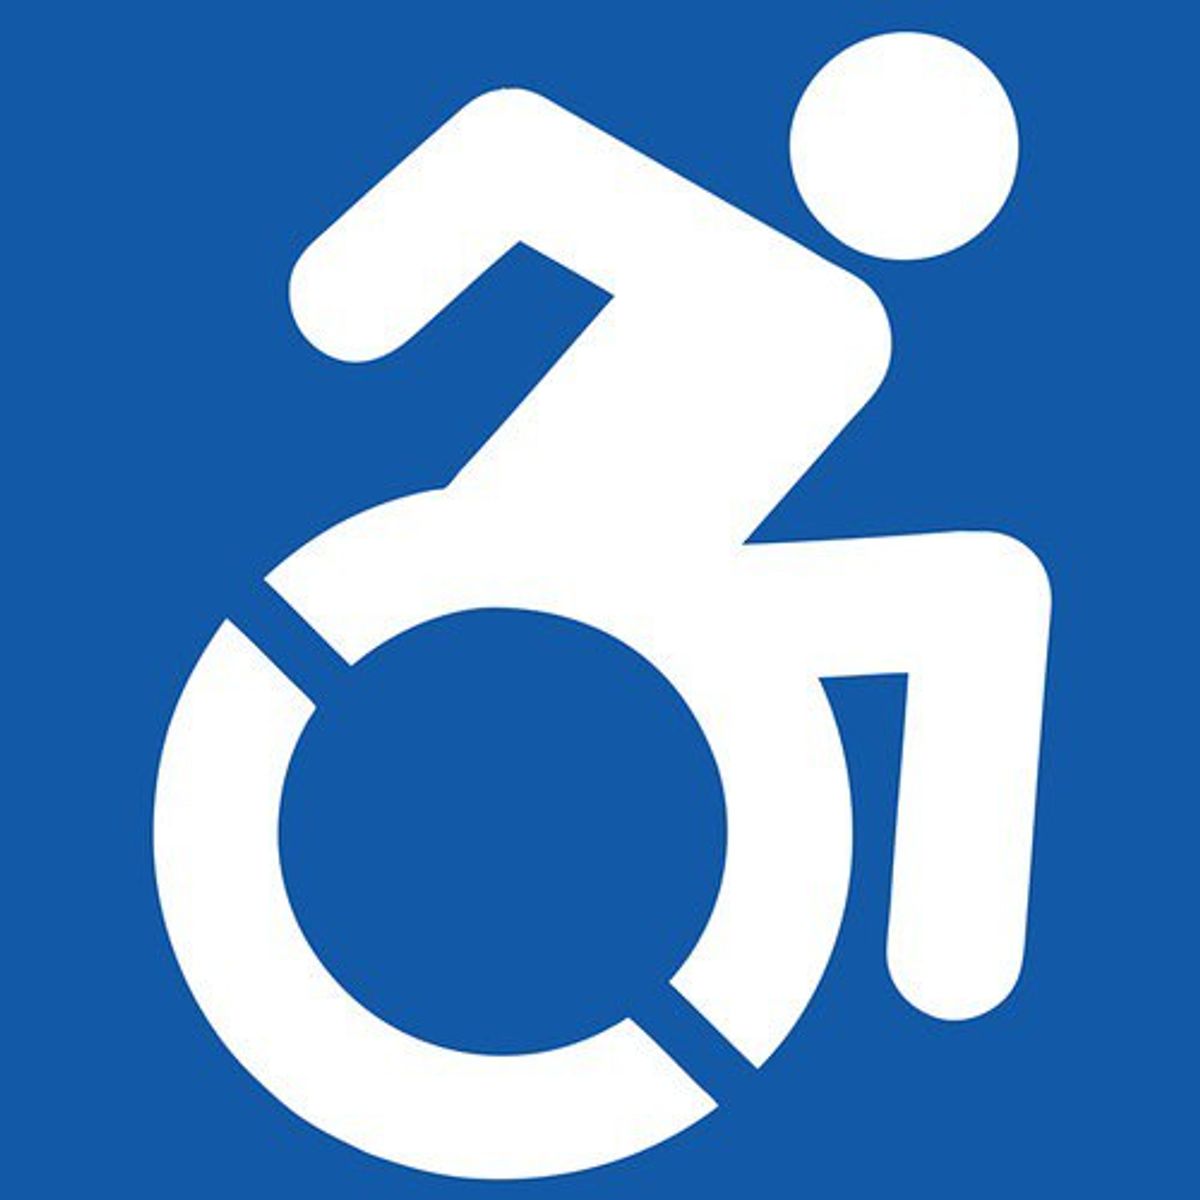 Activism By Design: The Accessible Icon